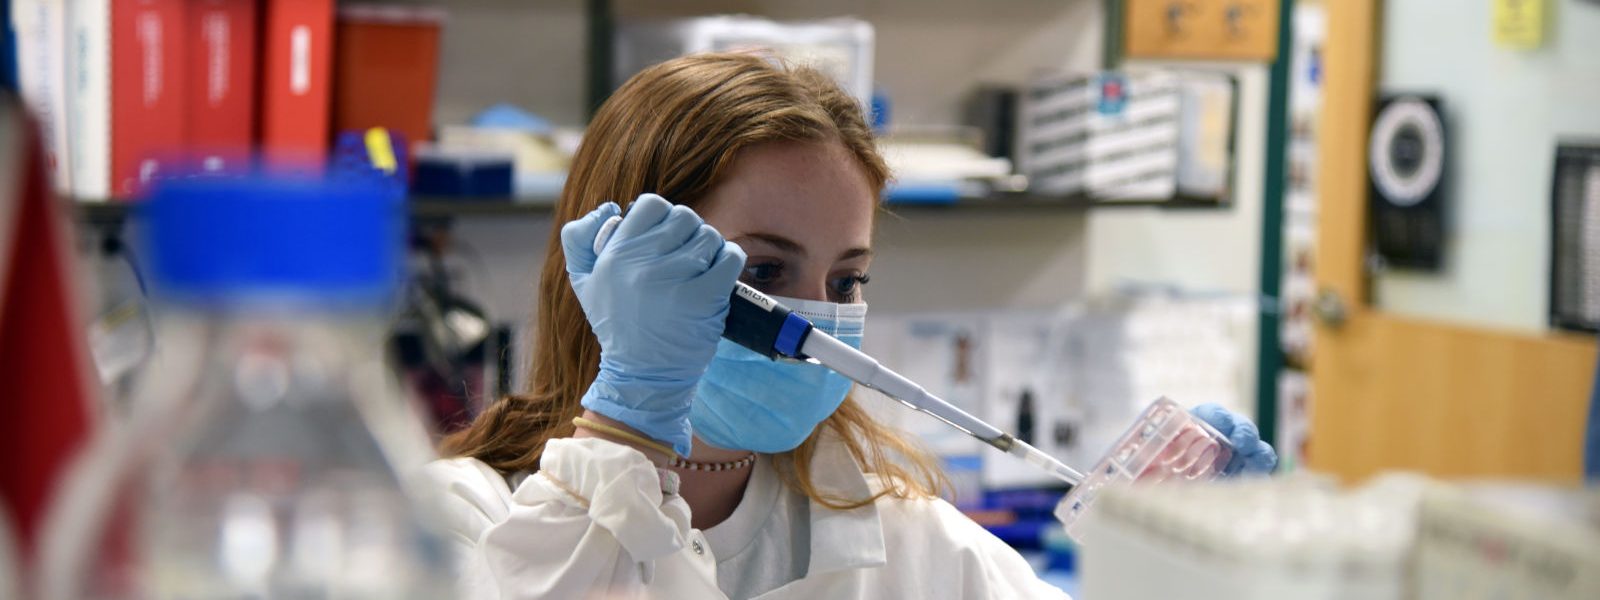 Abigail Interrante, an undergraduate student studying in the Department of Nutritional Sciences in the College of Agriculture, Health and Natural Resources, works in a lab in the Advanced Technology Laboratory. June 6, 2022. (Jason Sheldon/UConn Photo)